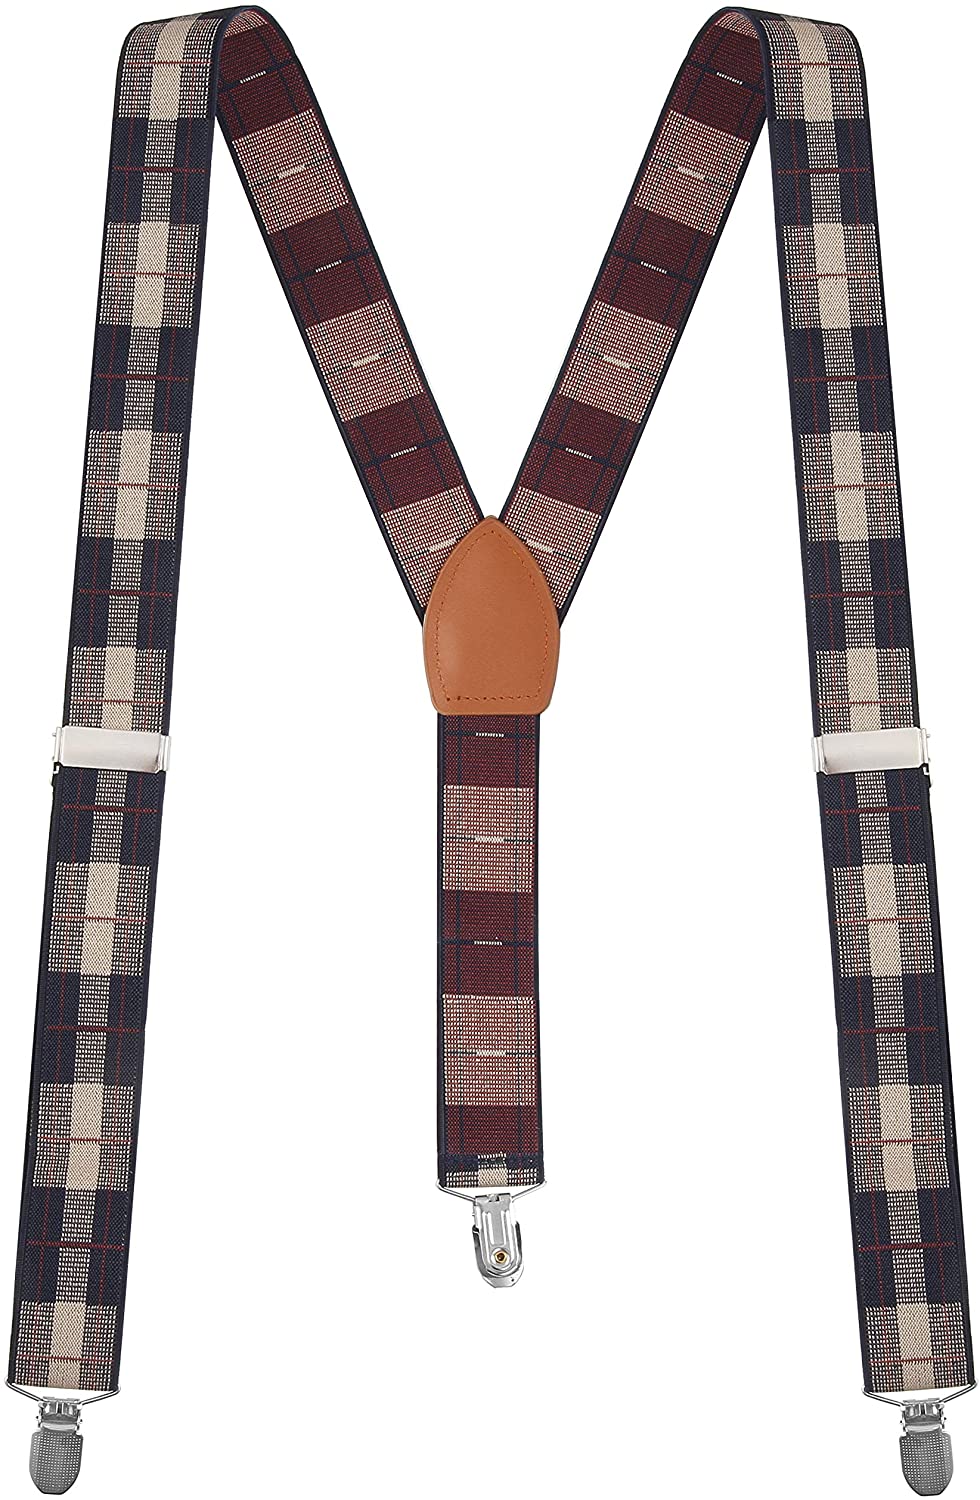 Calvertt Mens Suspenders Y-shape Tuxedo Suspenders Many Colors Available for Casual&Formal 